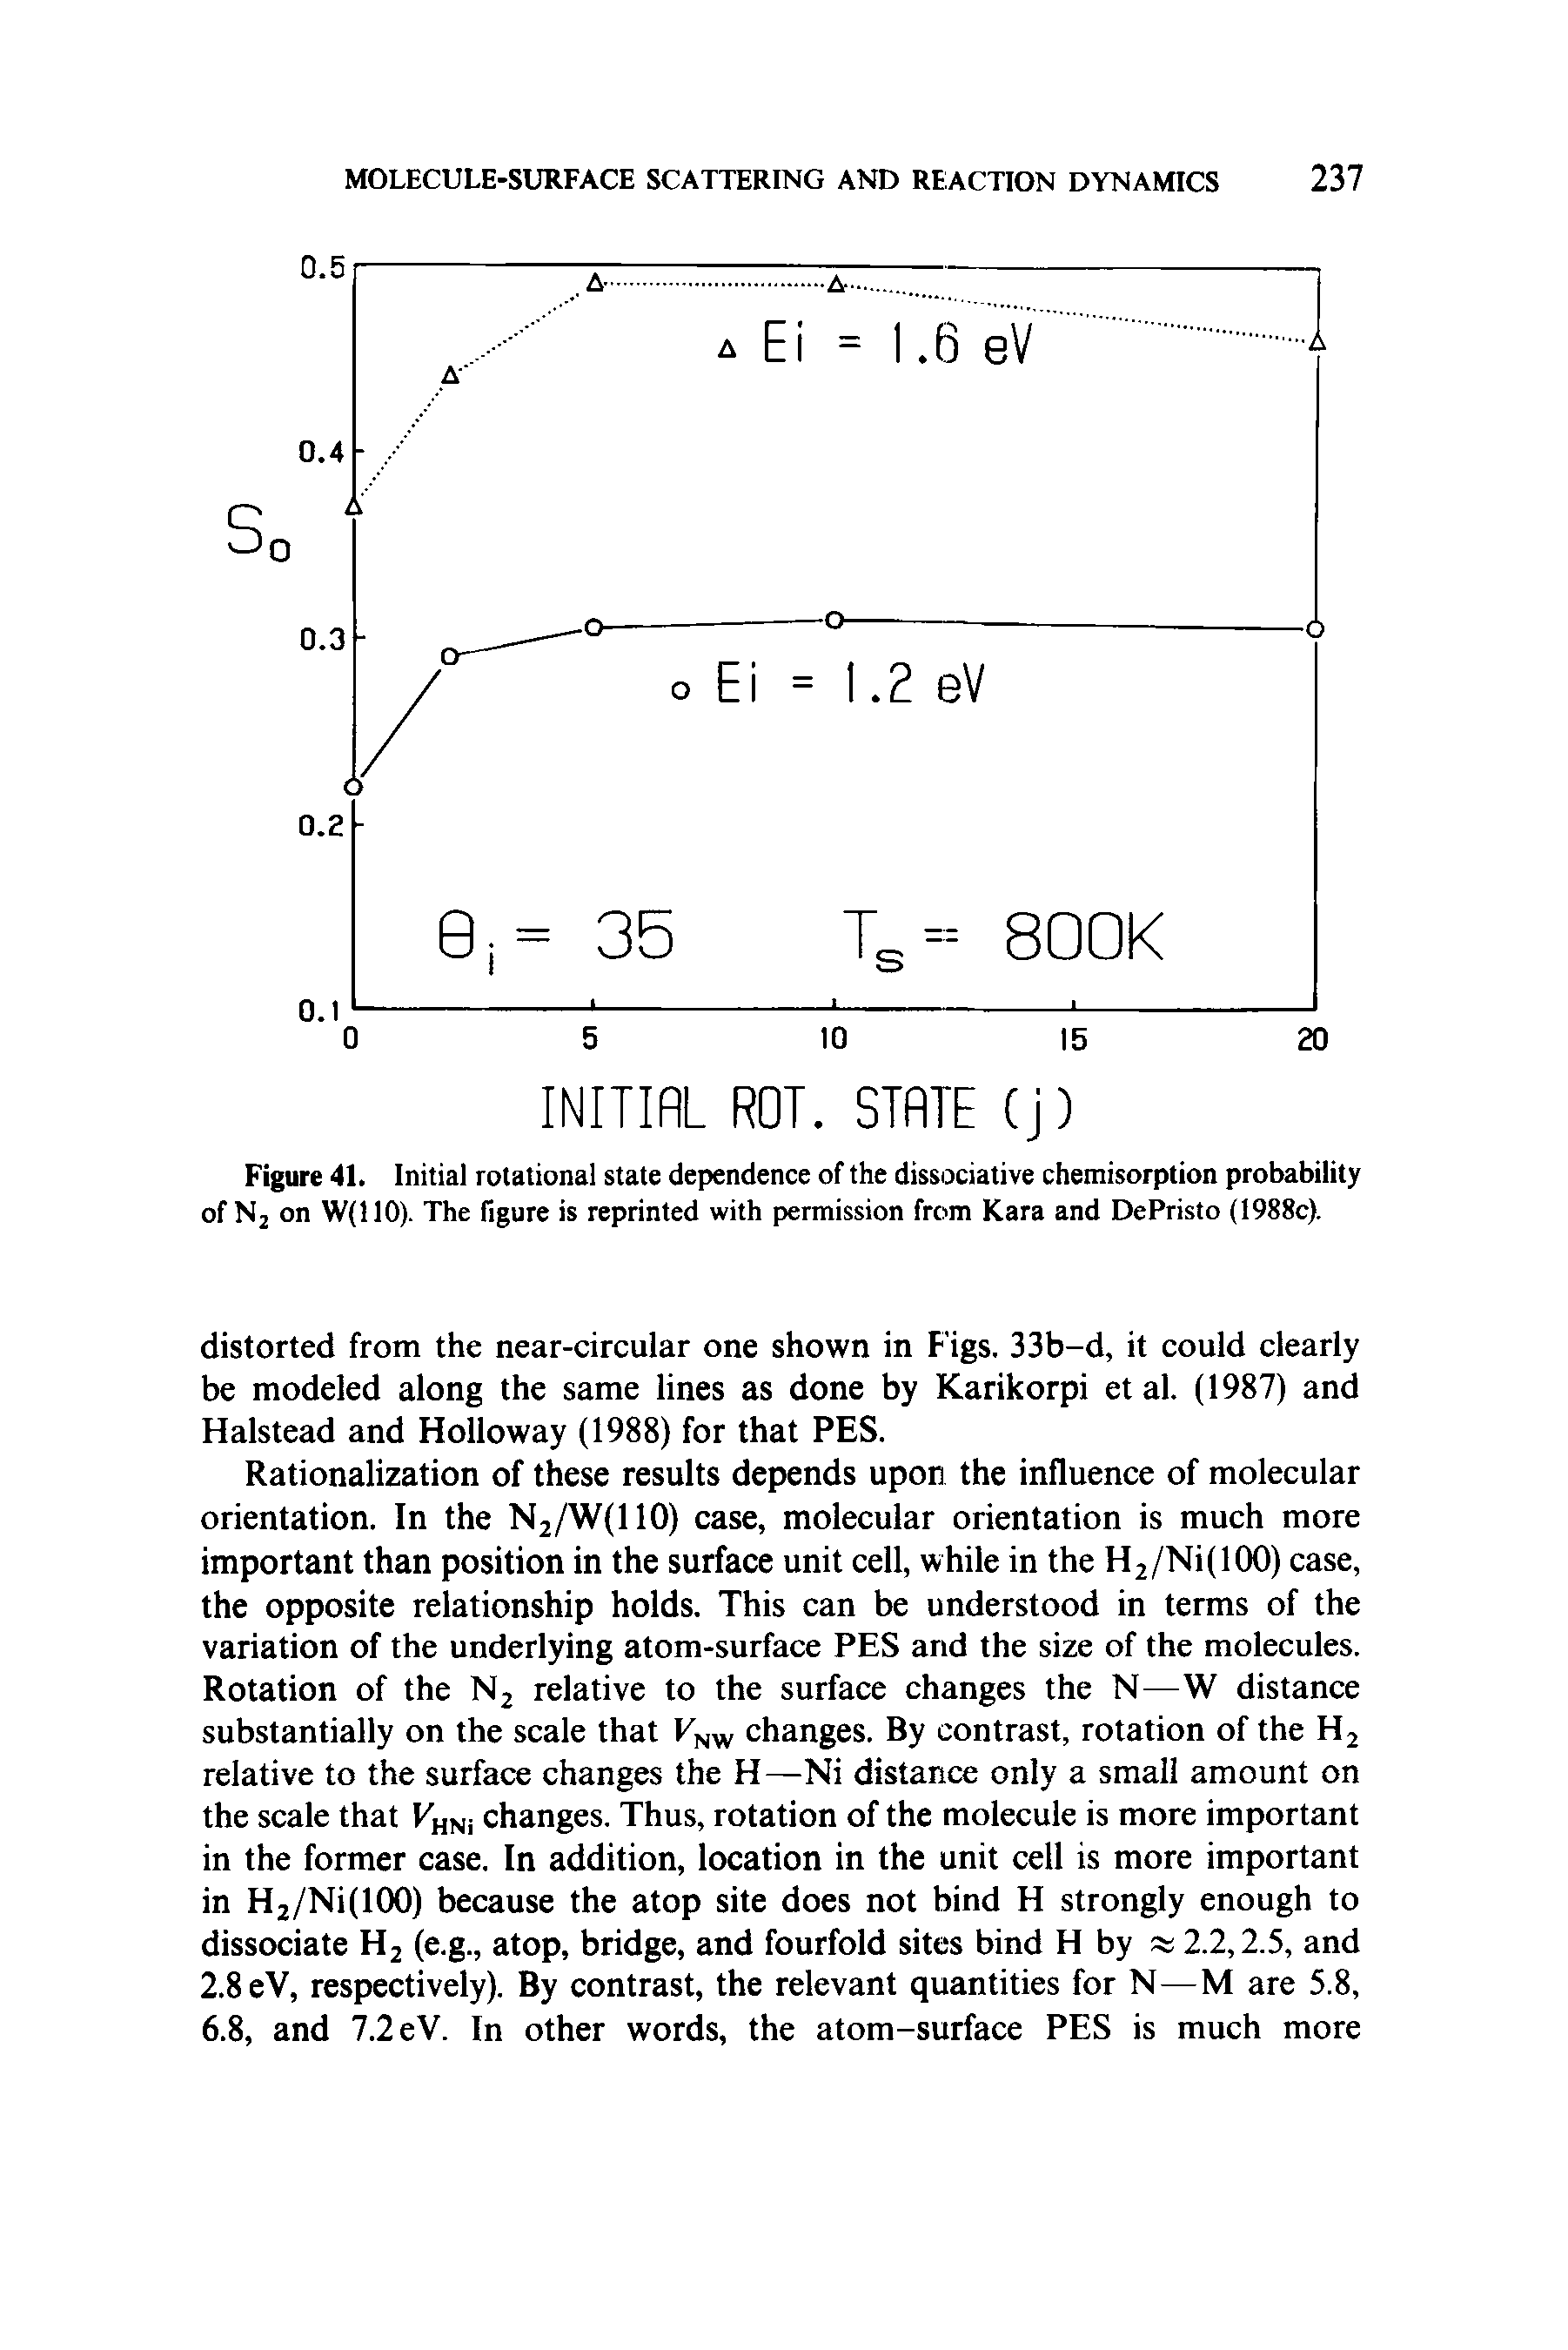 Figure 41. Initial rotational state dependence of the dissociative chemisorption probability of Nj on W(llO). The figure is reprinted with permission from Kara and DePristo (1988c).